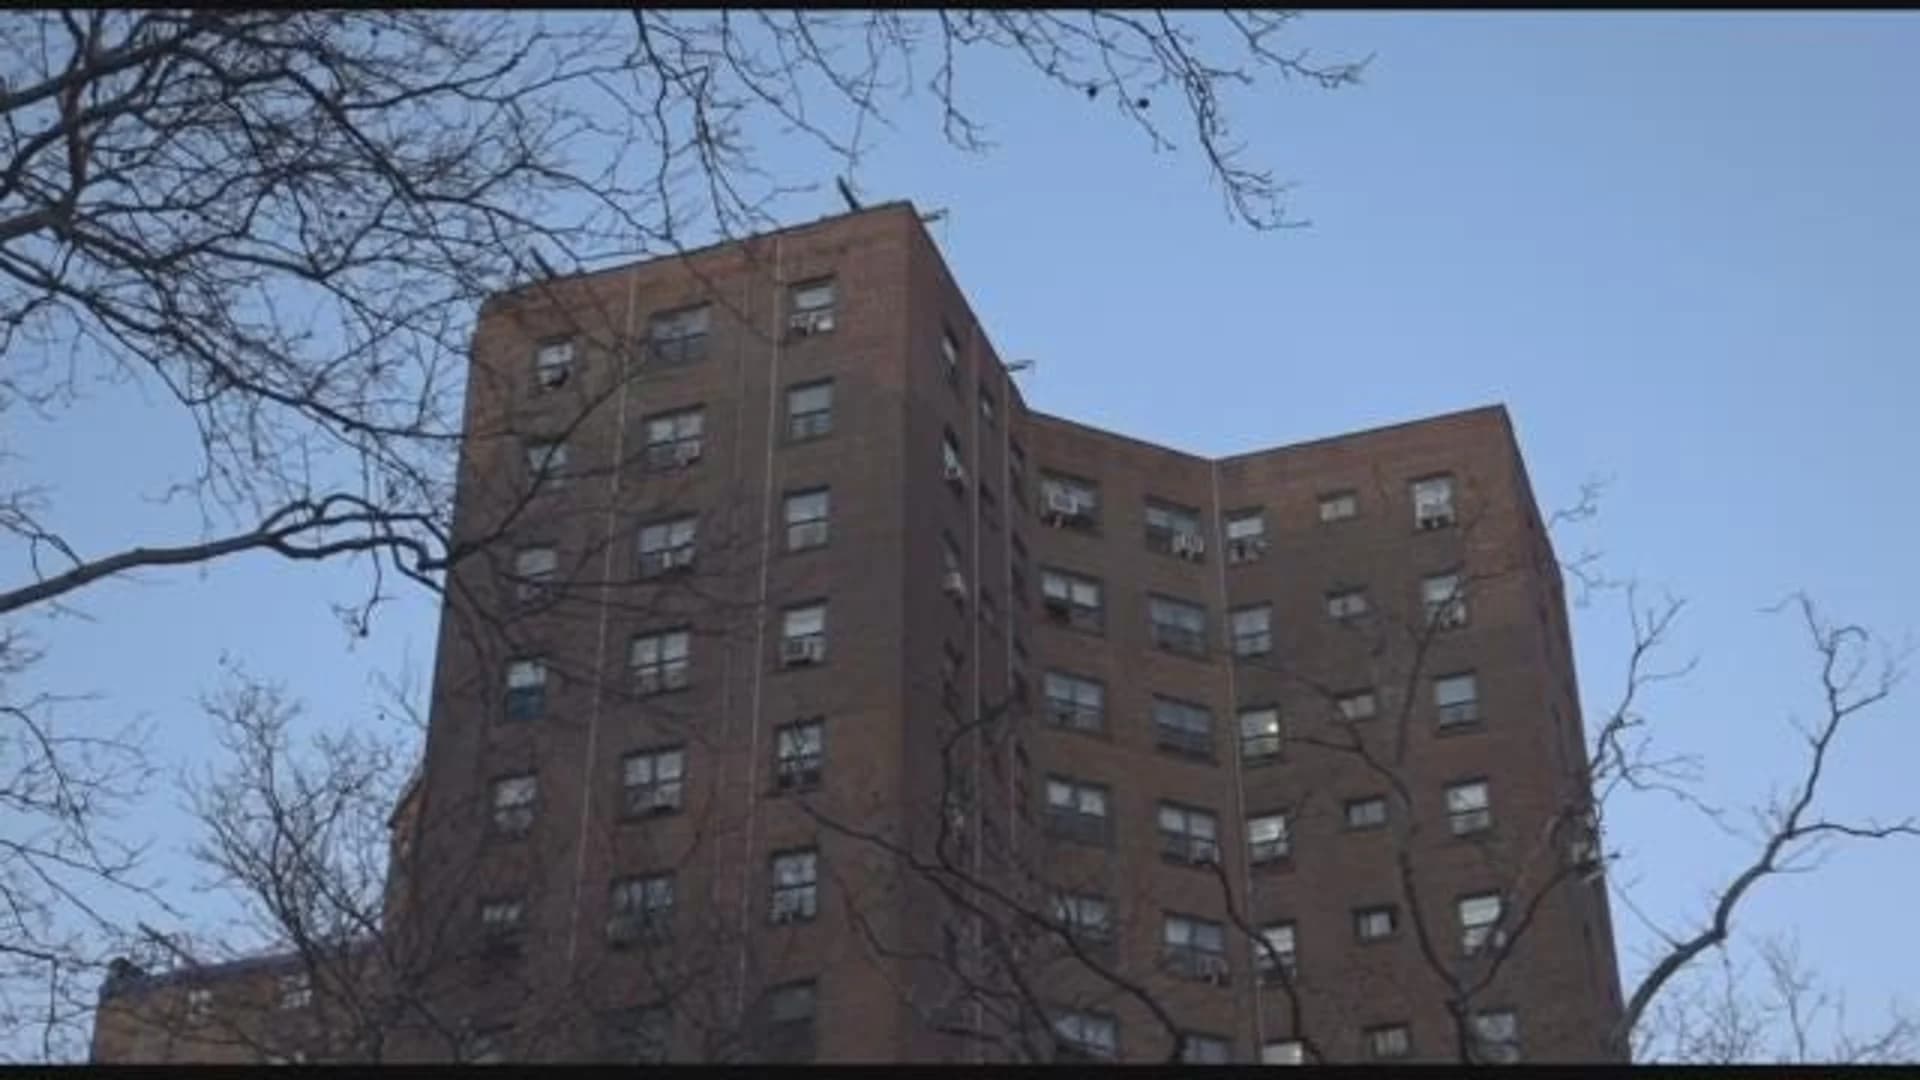 Bronx River Houses last on the list for lead paint removal